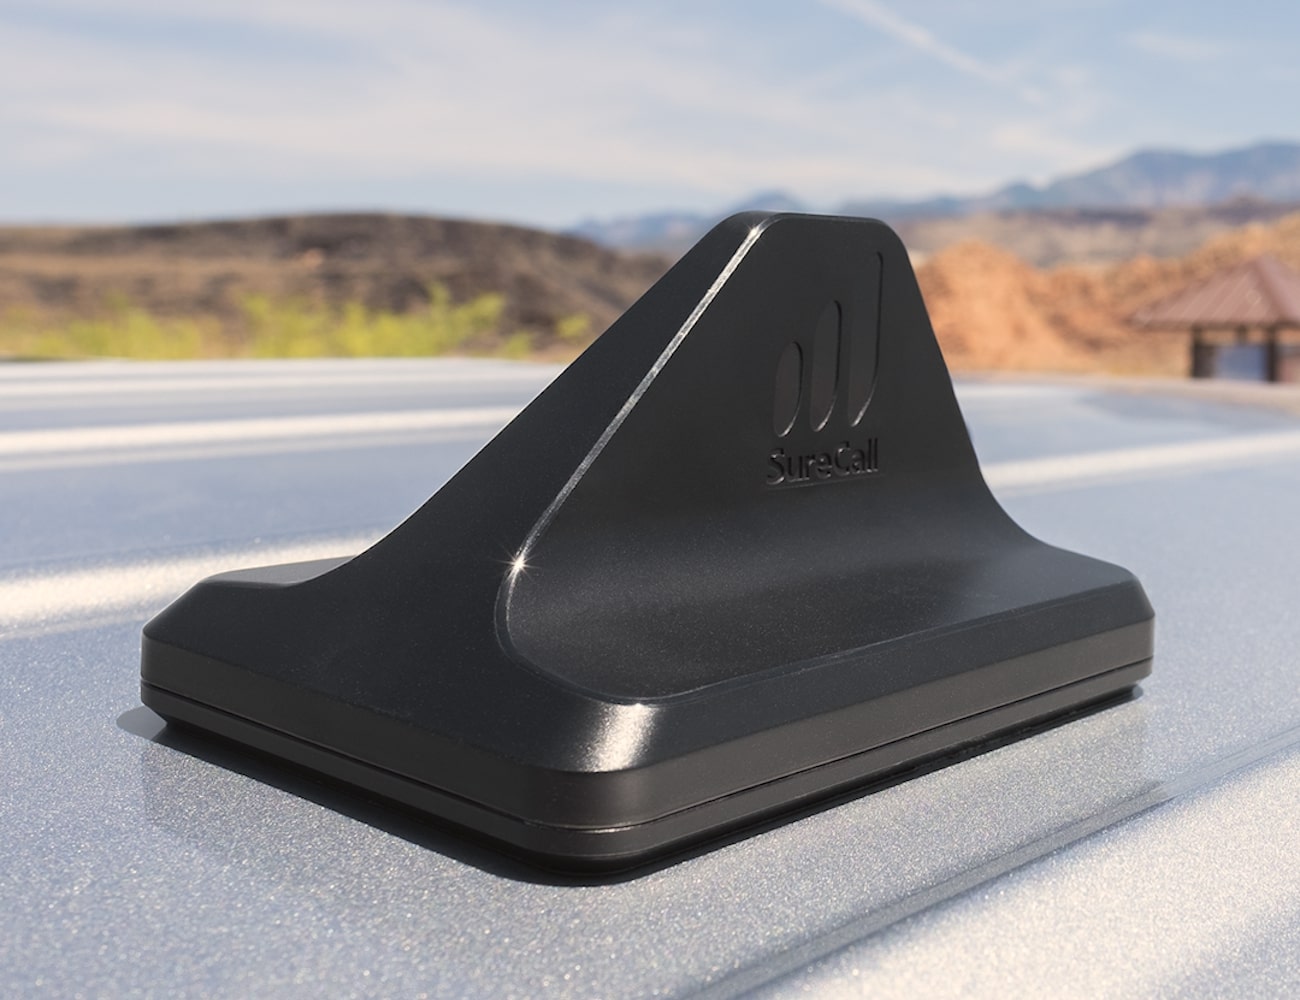 SureCall N-Range Vehicle Cell Phone Signal Booster enhances connectivity